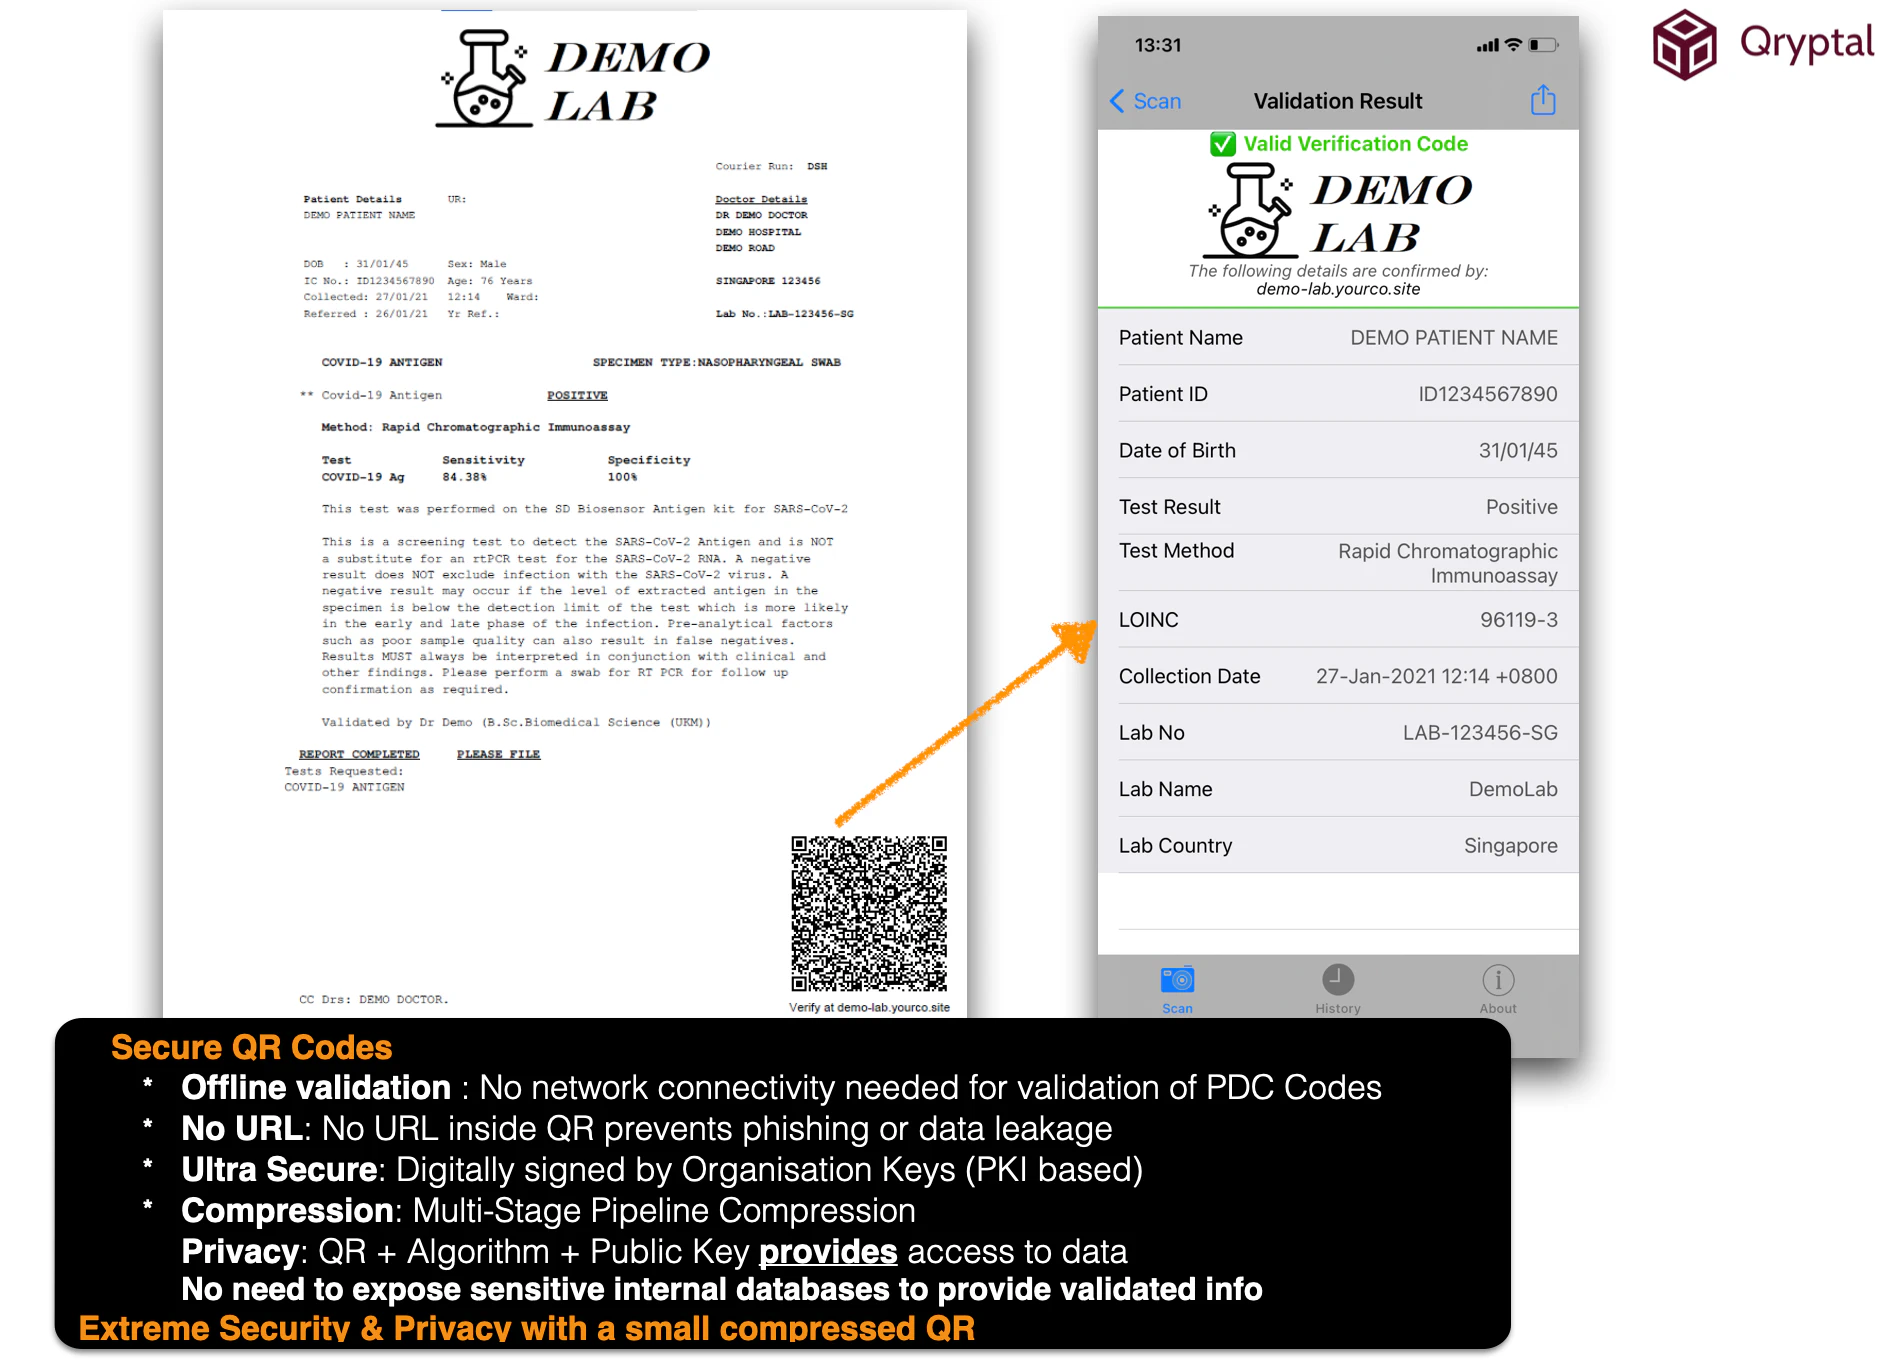 Sample Covid test report with secure QR code